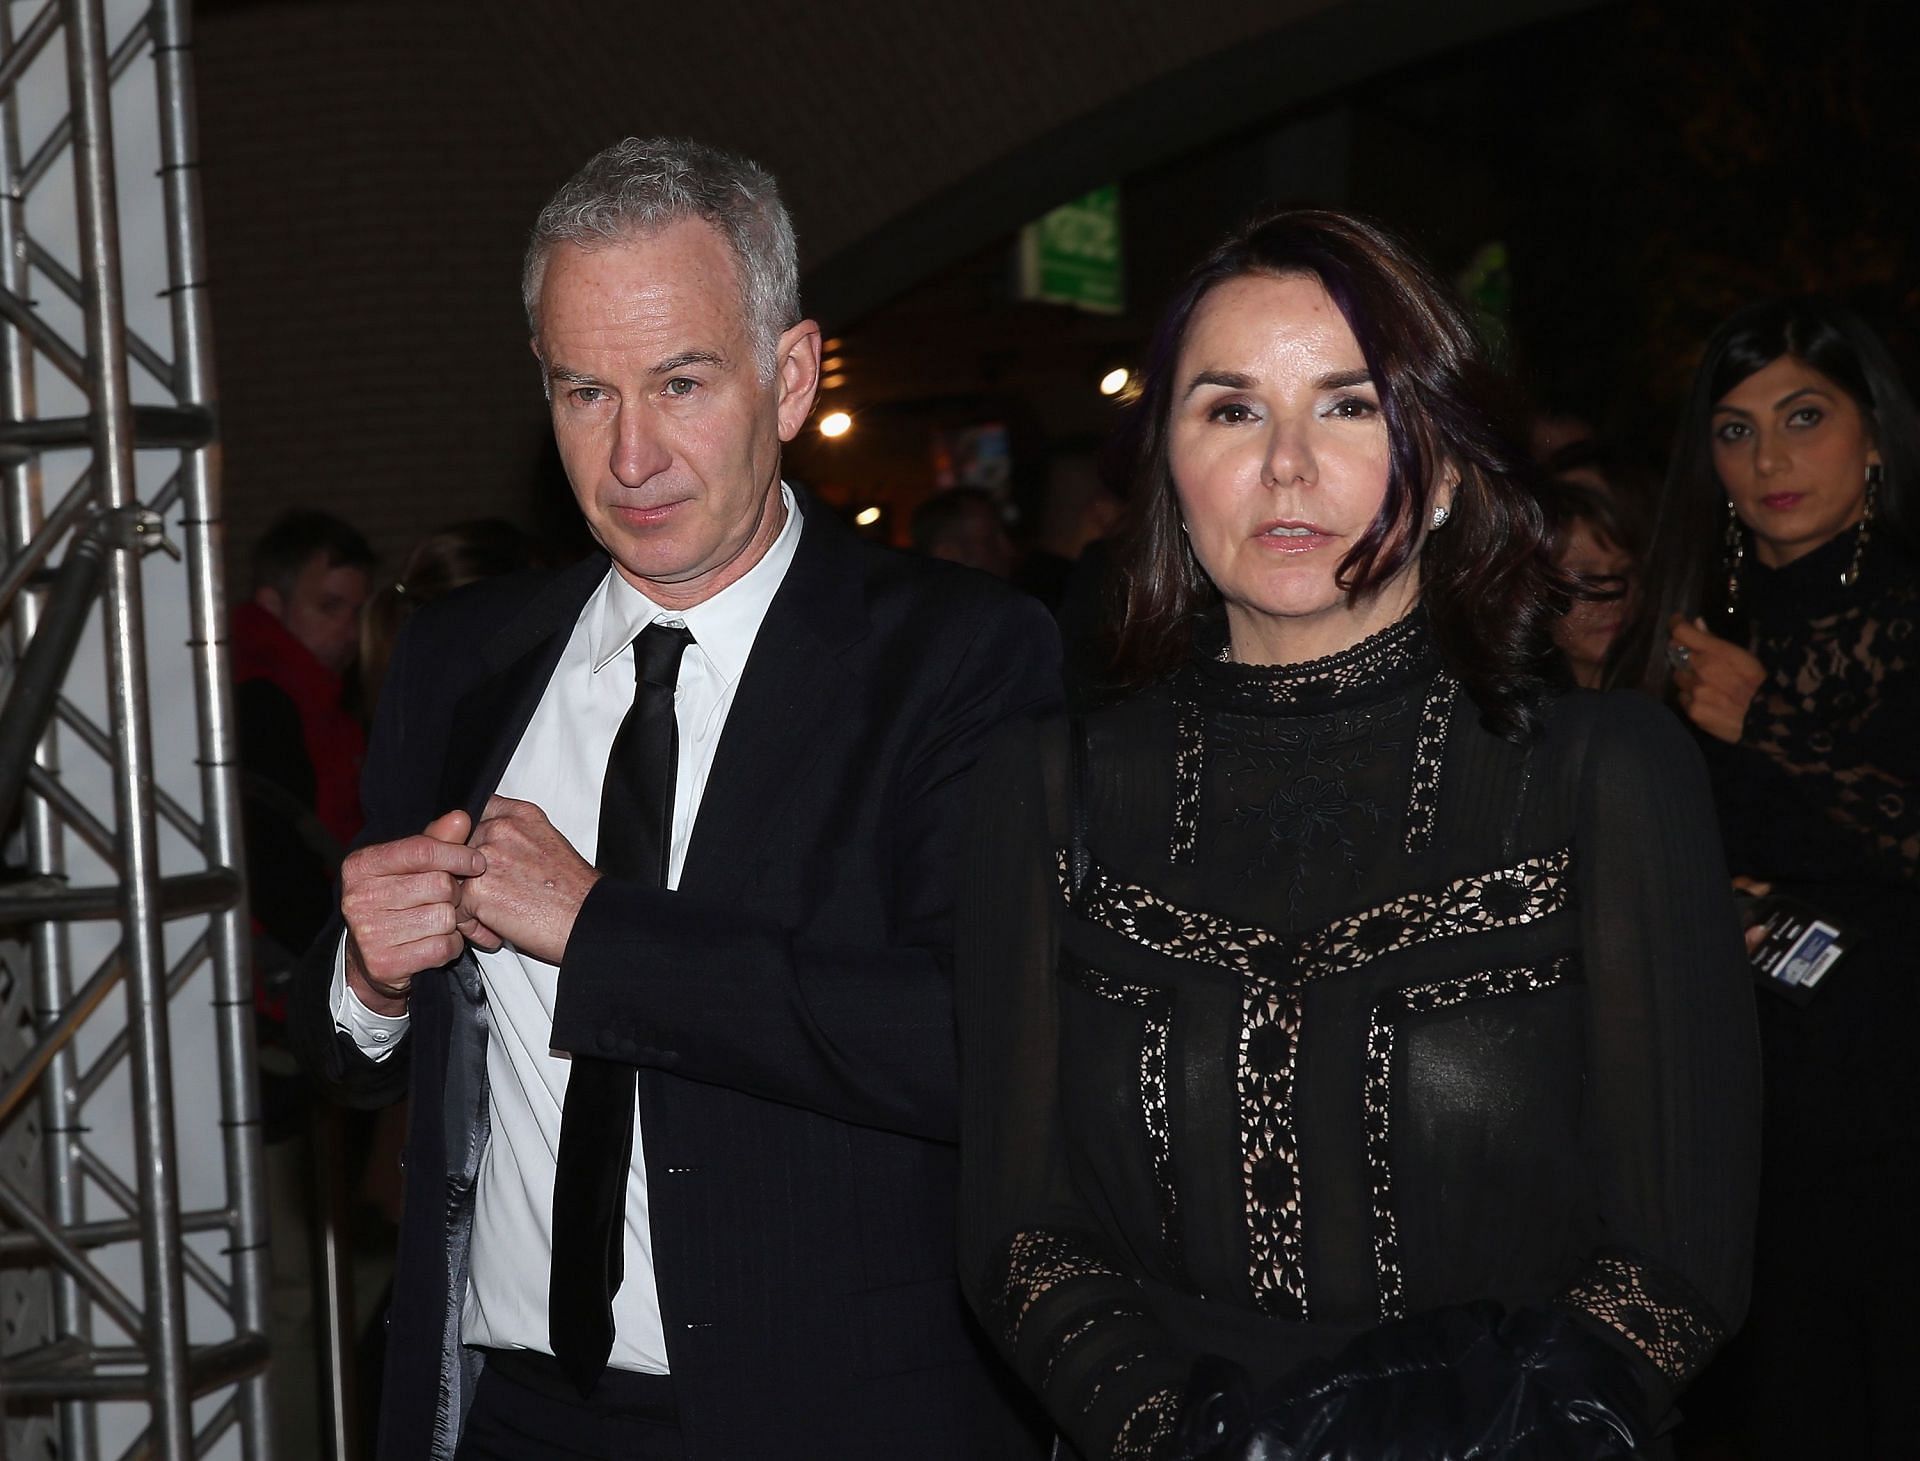 John McEnroe and Patty Smyth have been together since 1993